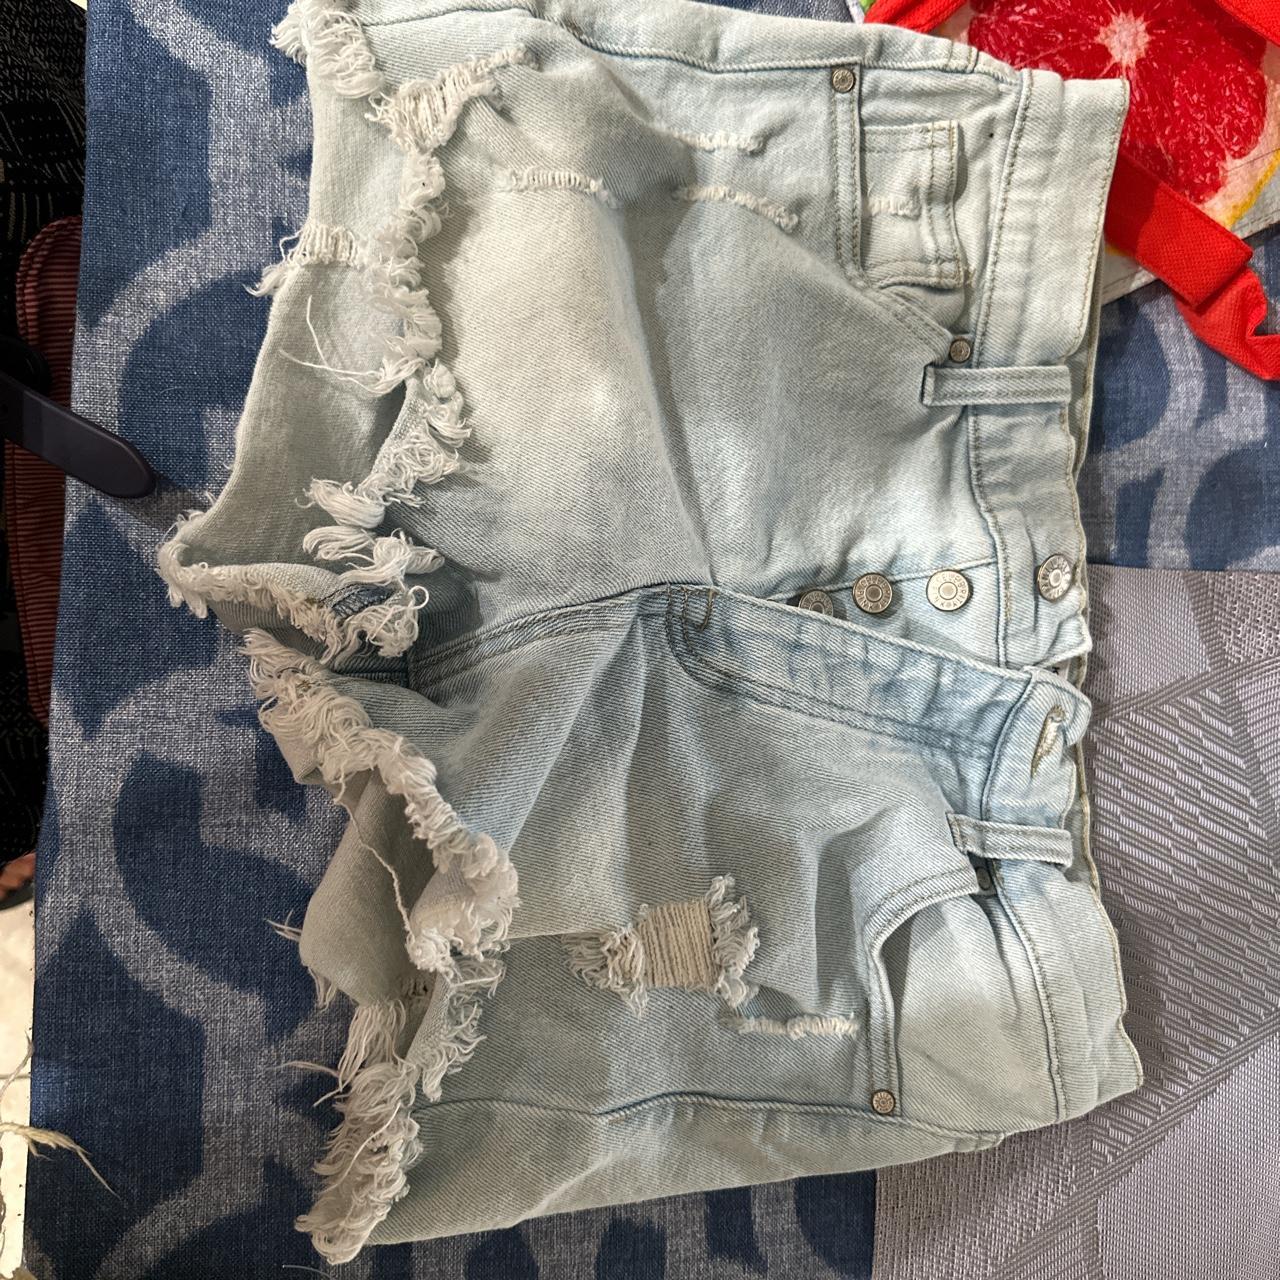 Side ripped nothing a little super glue or stitch - Depop